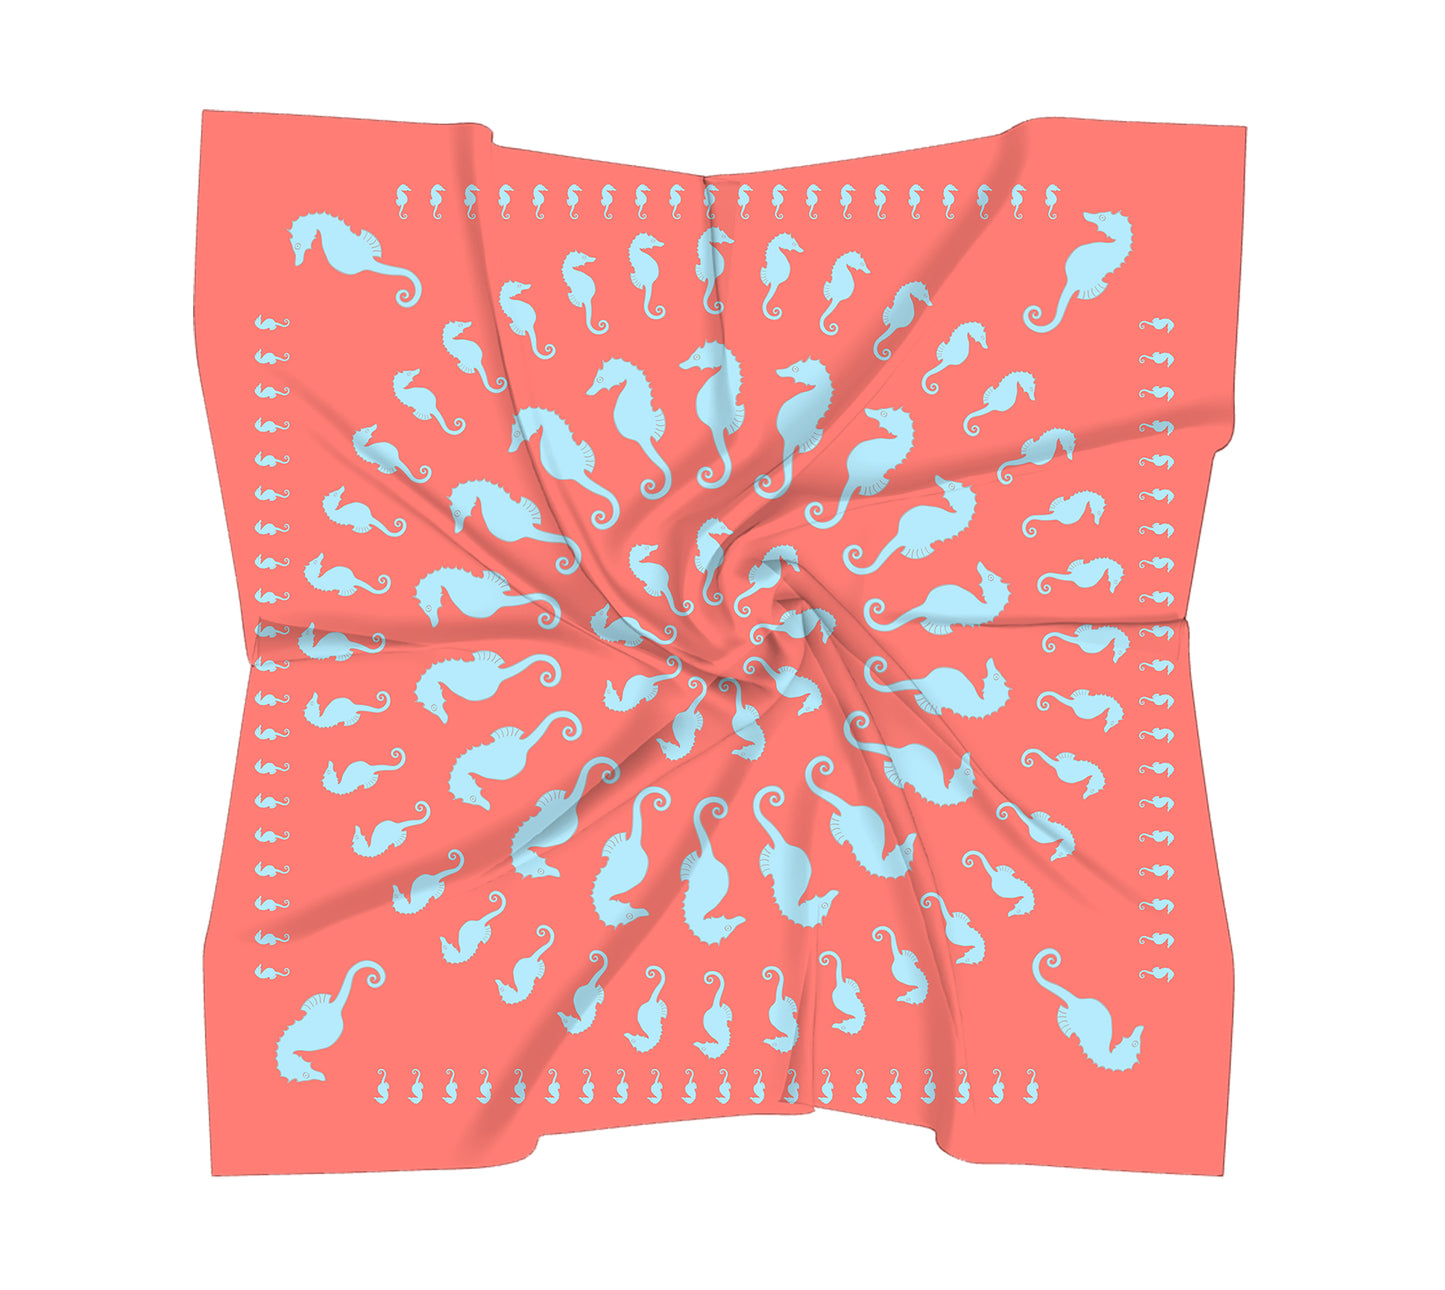 Seahorse Square Scarf - Light Blue On Coral